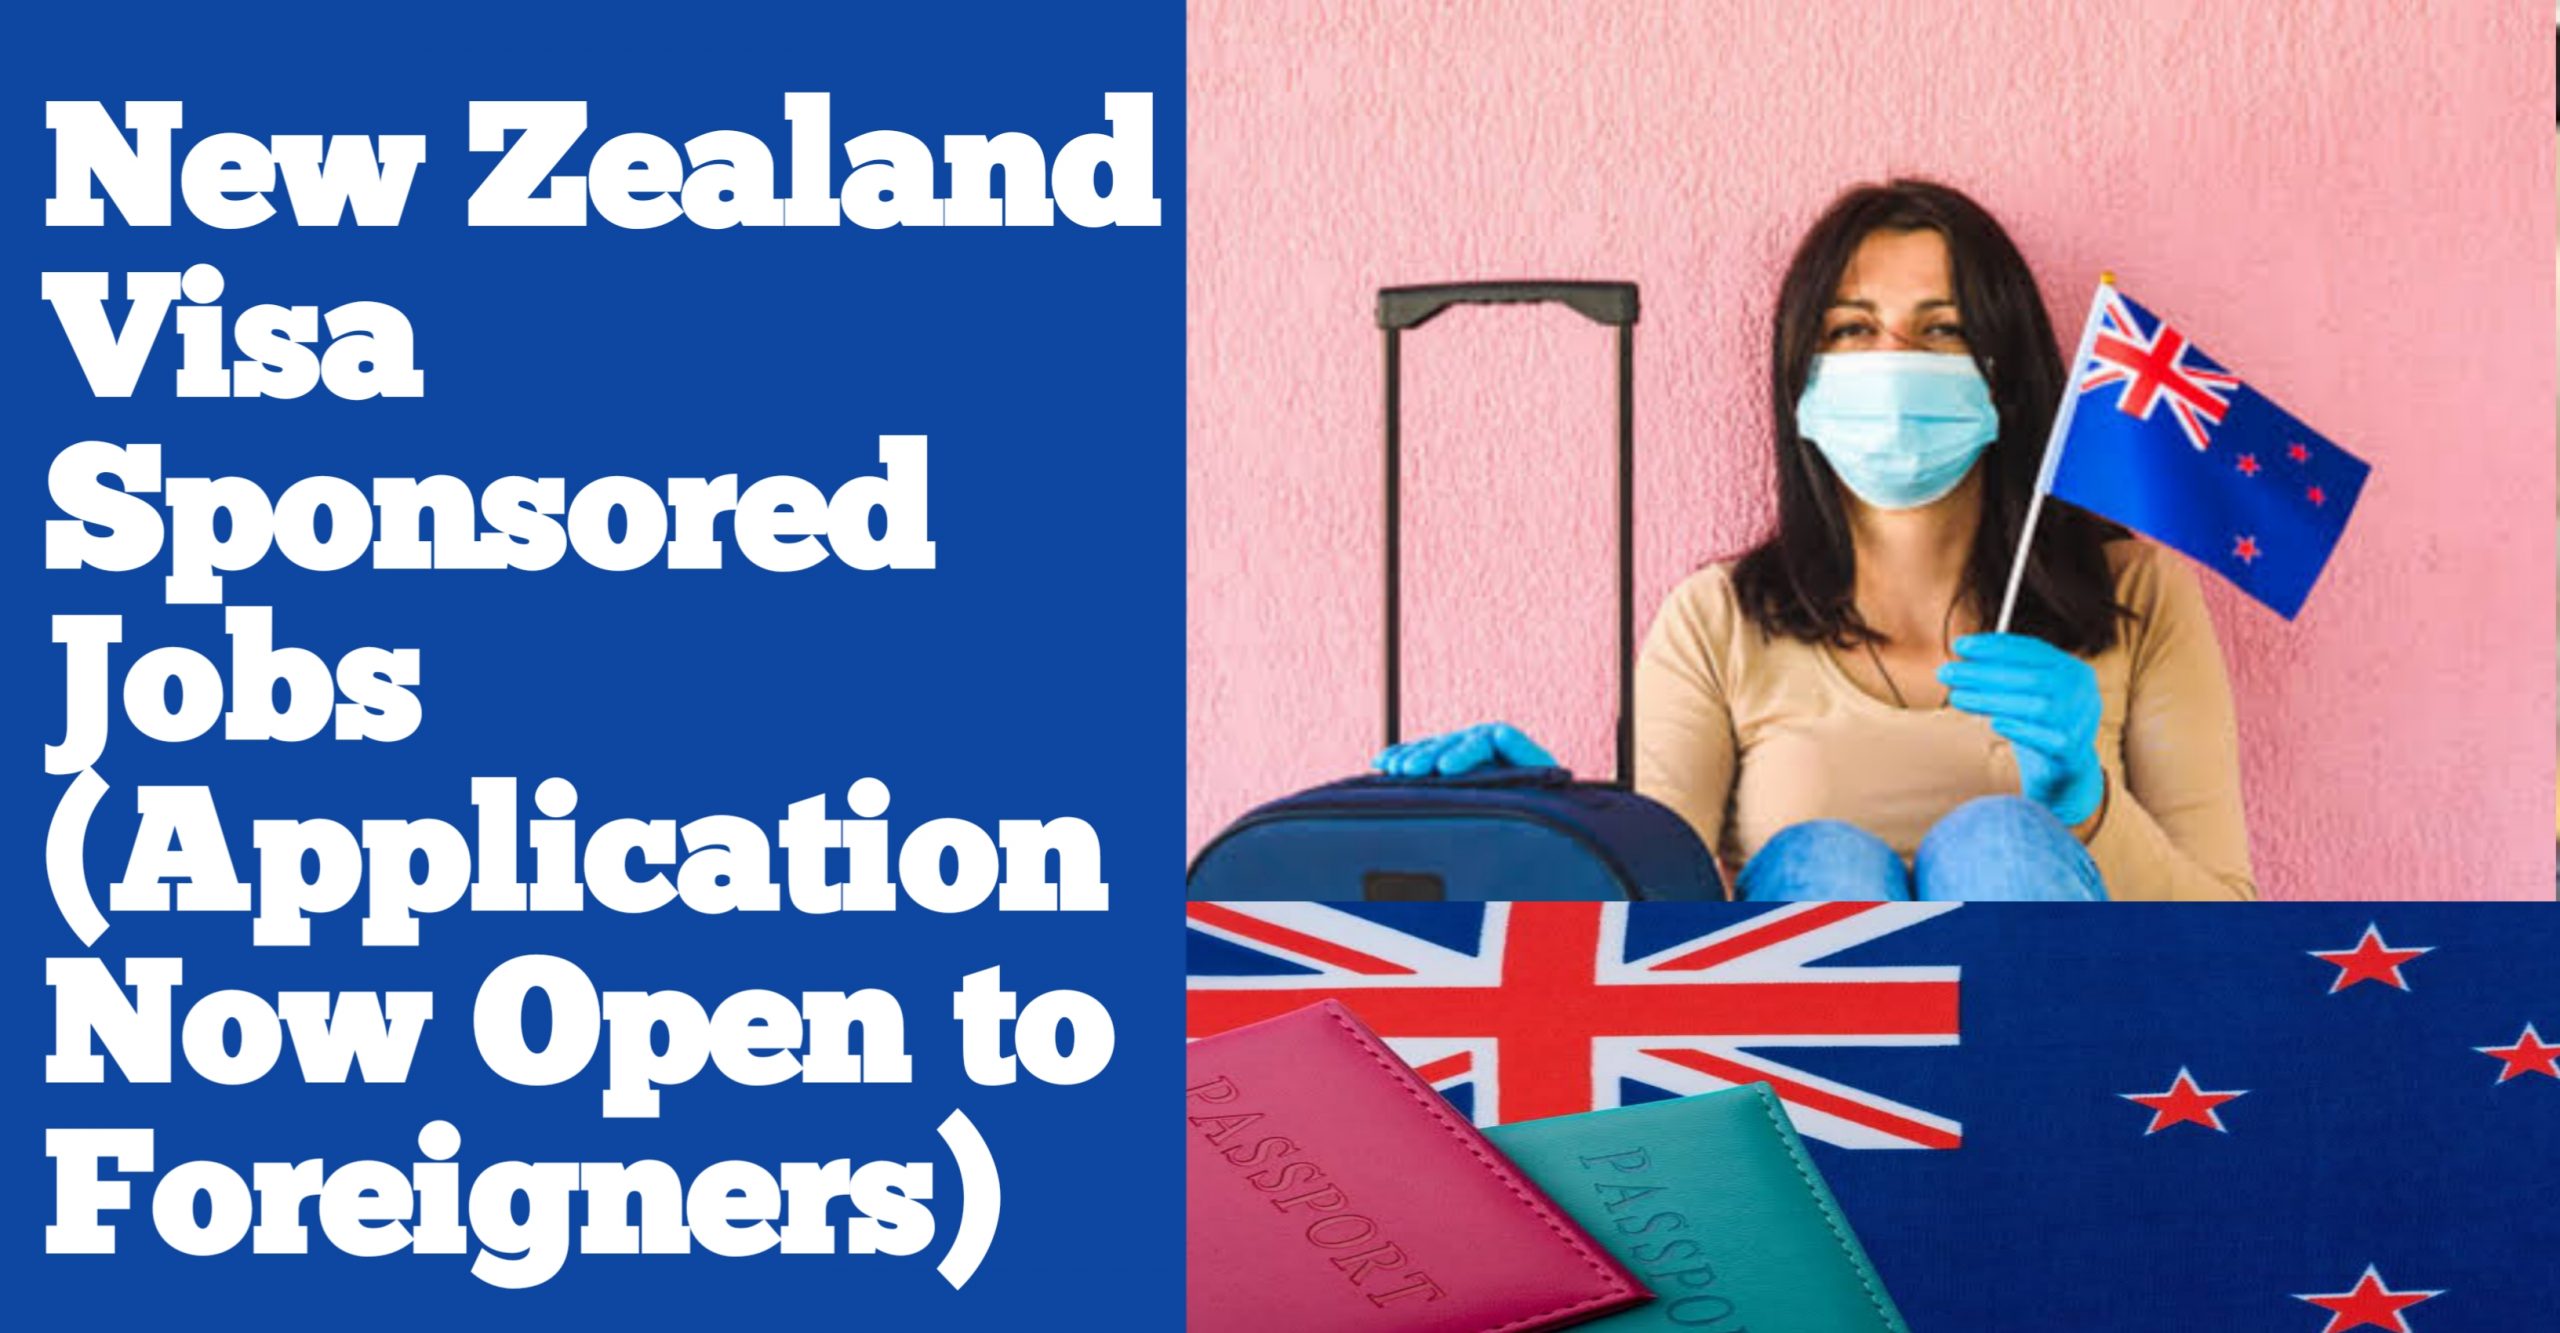 New Zealand Visa Sponsored Jobs (Application Open To Foreigners